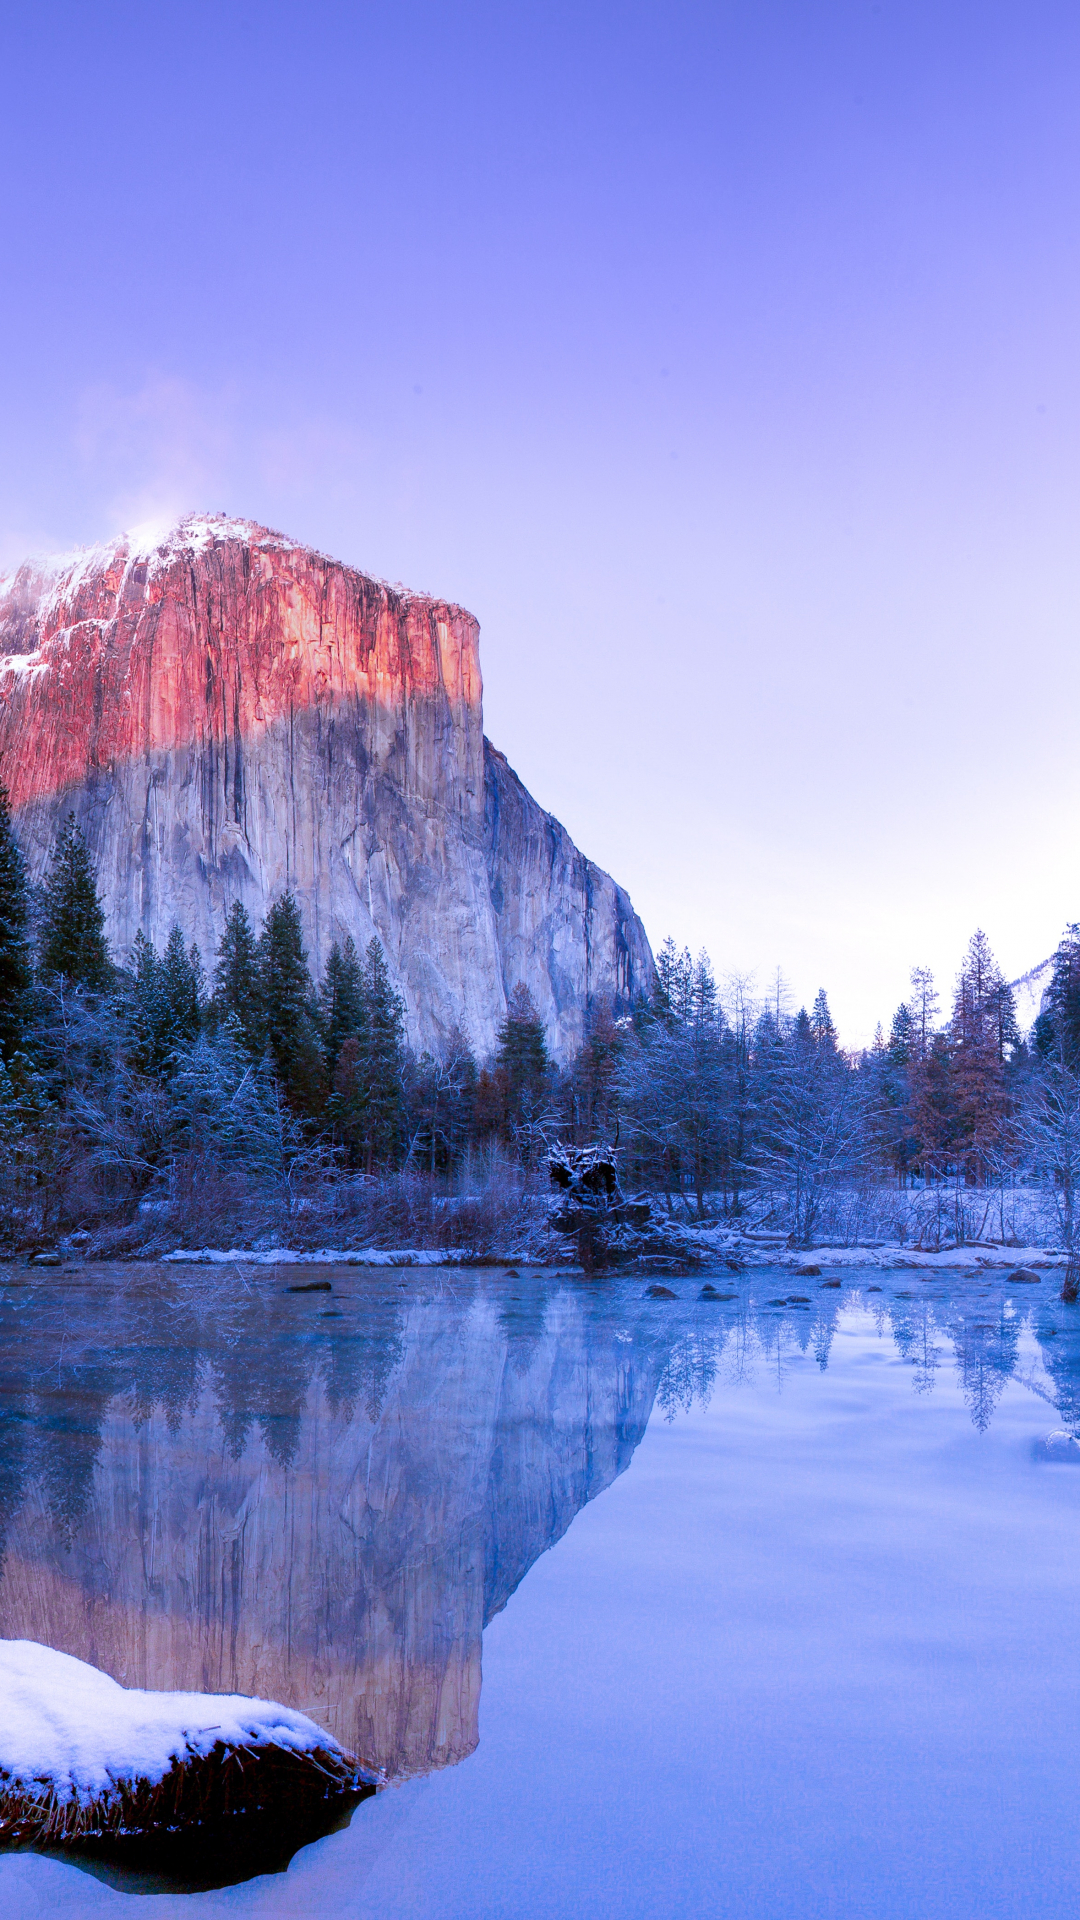 yosemite iphone wallpaper,natural landscape,nature,reflection,body of water,mountain